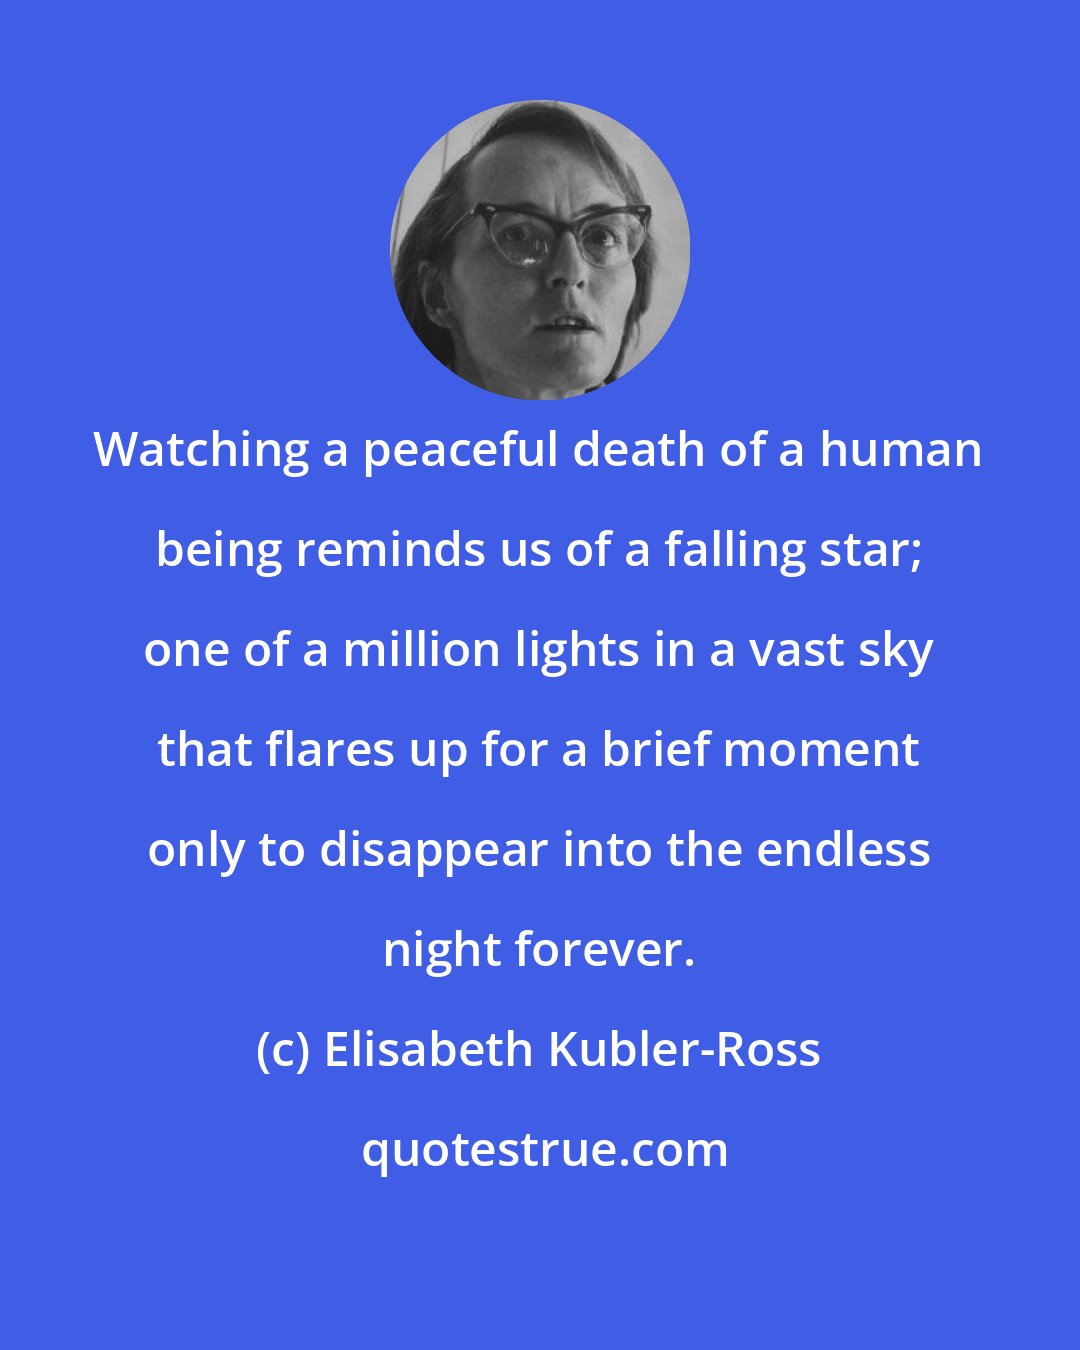 Elisabeth Kubler-Ross: Watching a peaceful death of a human being reminds us of a falling star; one of a million lights in a vast sky that flares up for a brief moment only to disappear into the endless night forever.